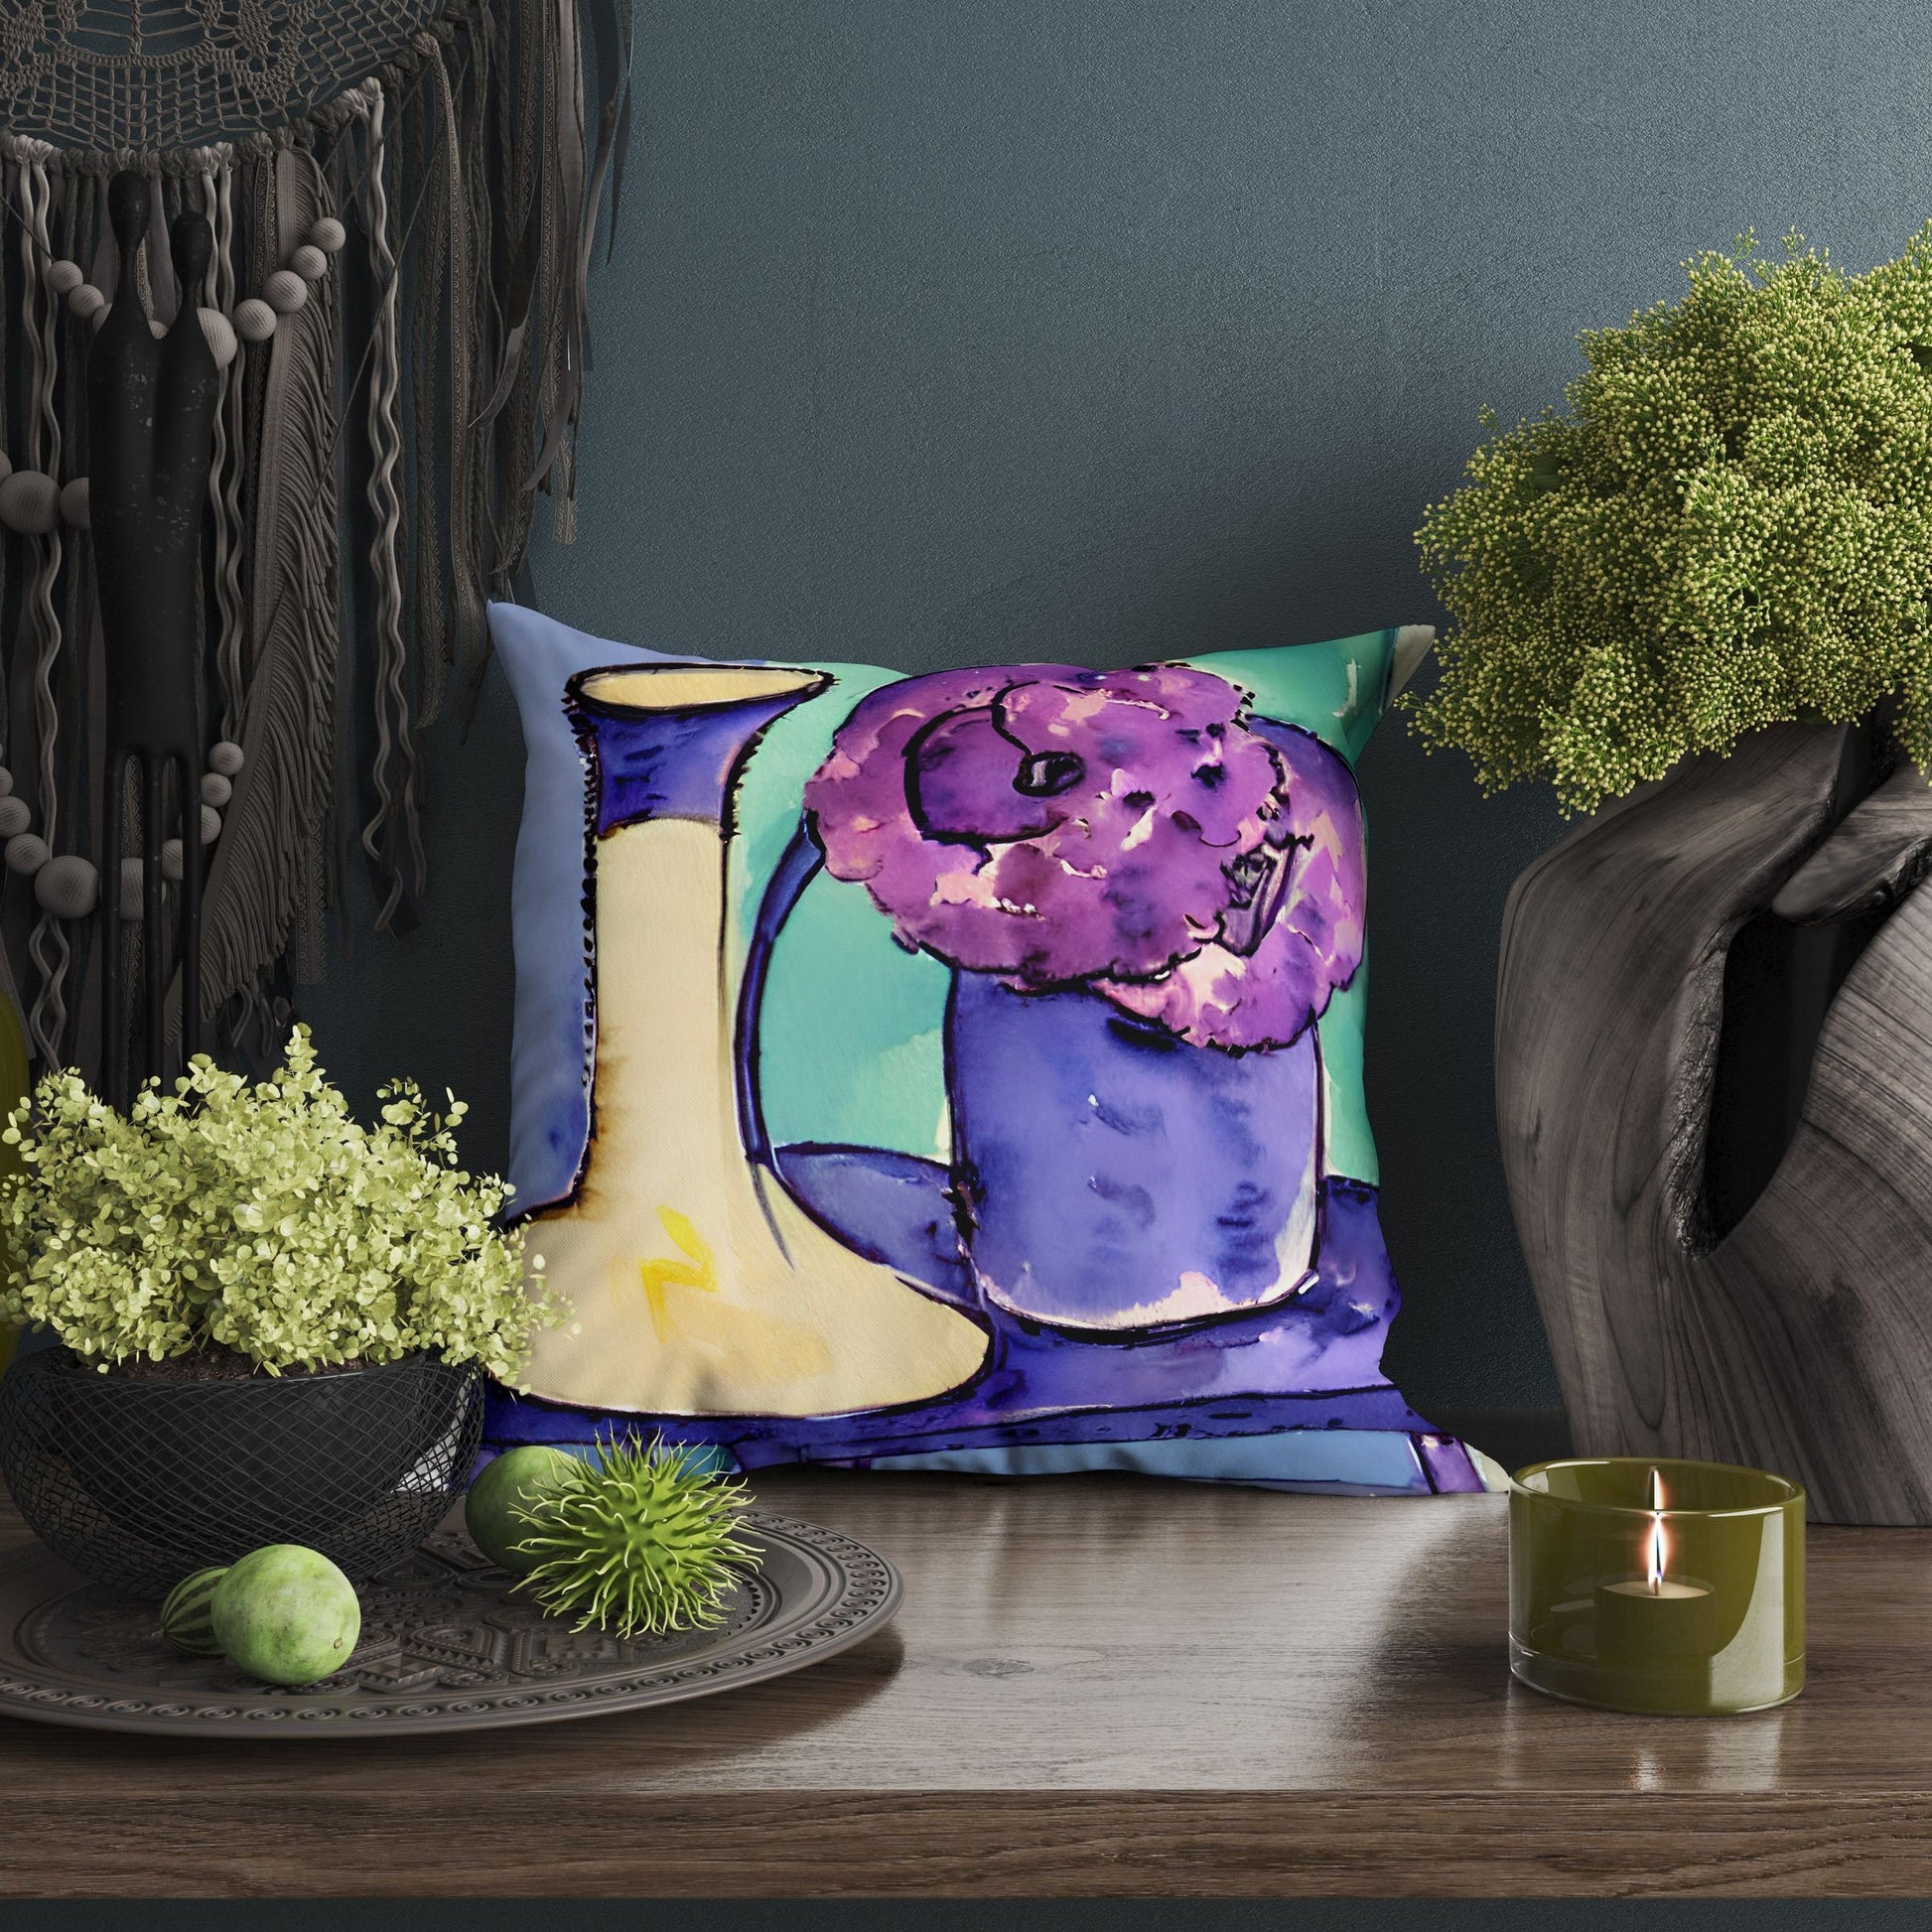 Still Life With Flowers Decorative Pillow, Abstract Throw Pillow, Soft Pillow Cases, Colorful Pillow Case, Home Decor Pillow, Abstract Decor